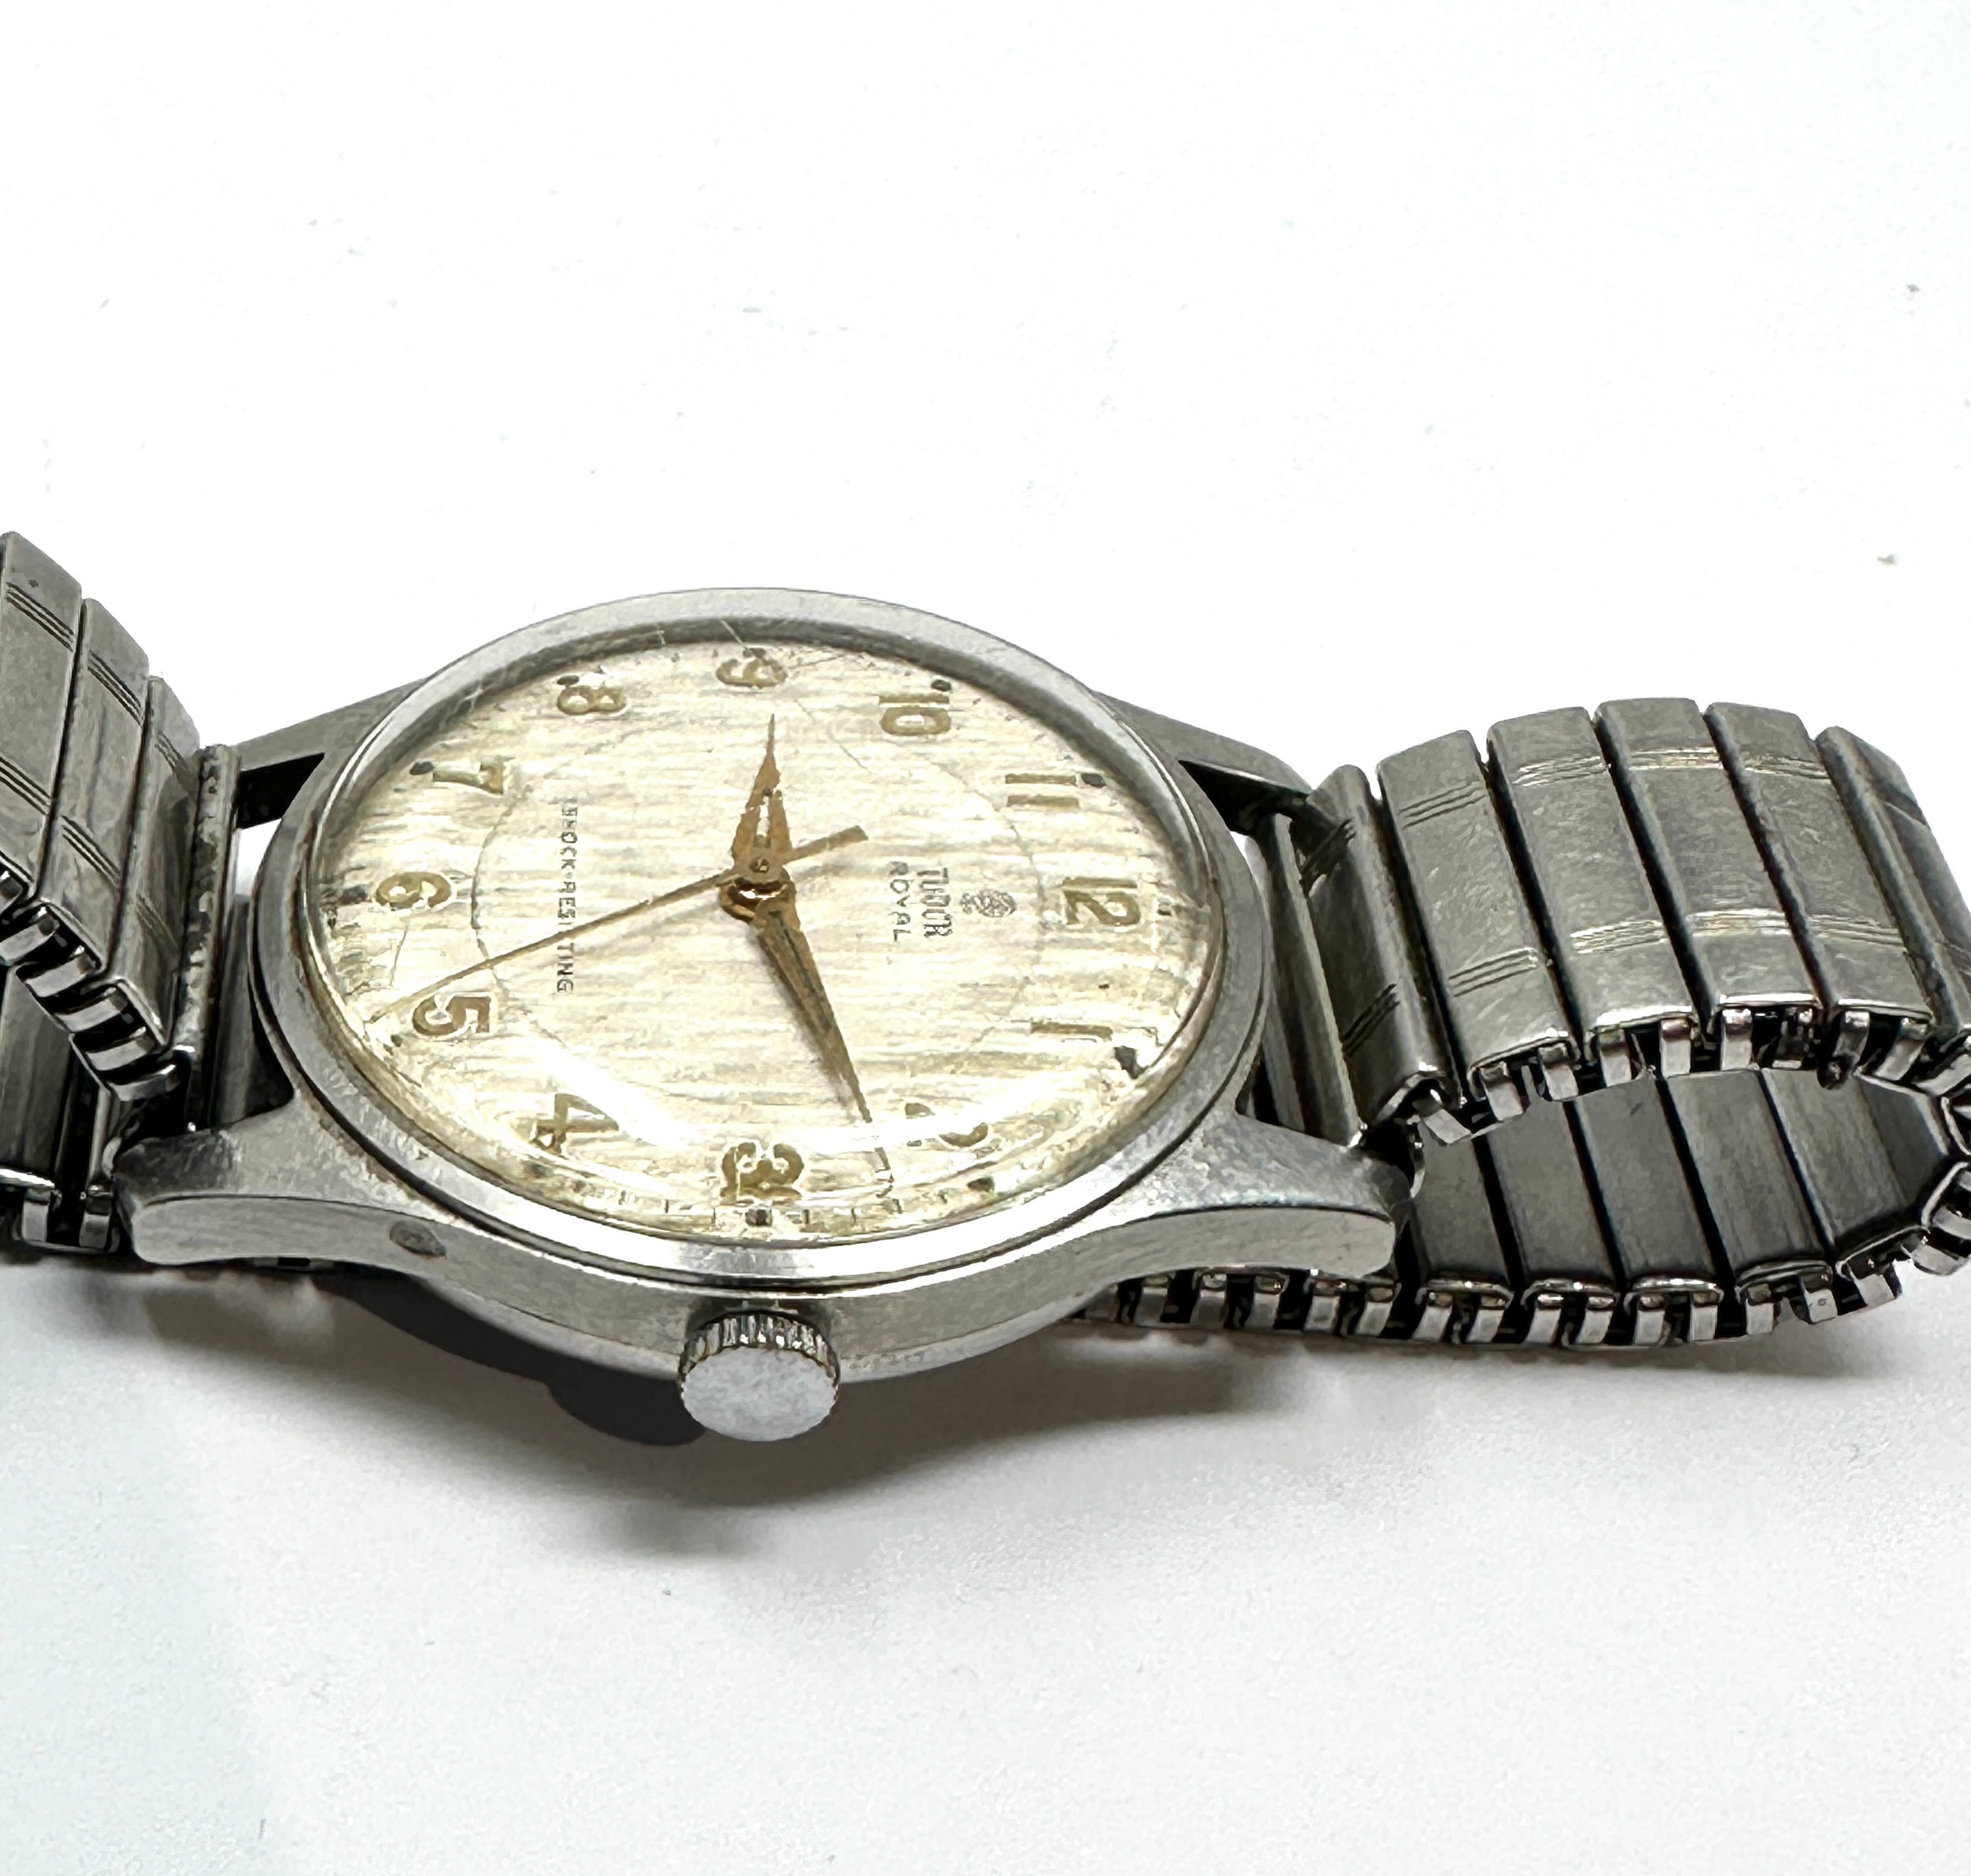 vintage 1960s tudor royal presentation wristwatch s/steel the watch is ticking - Image 3 of 4